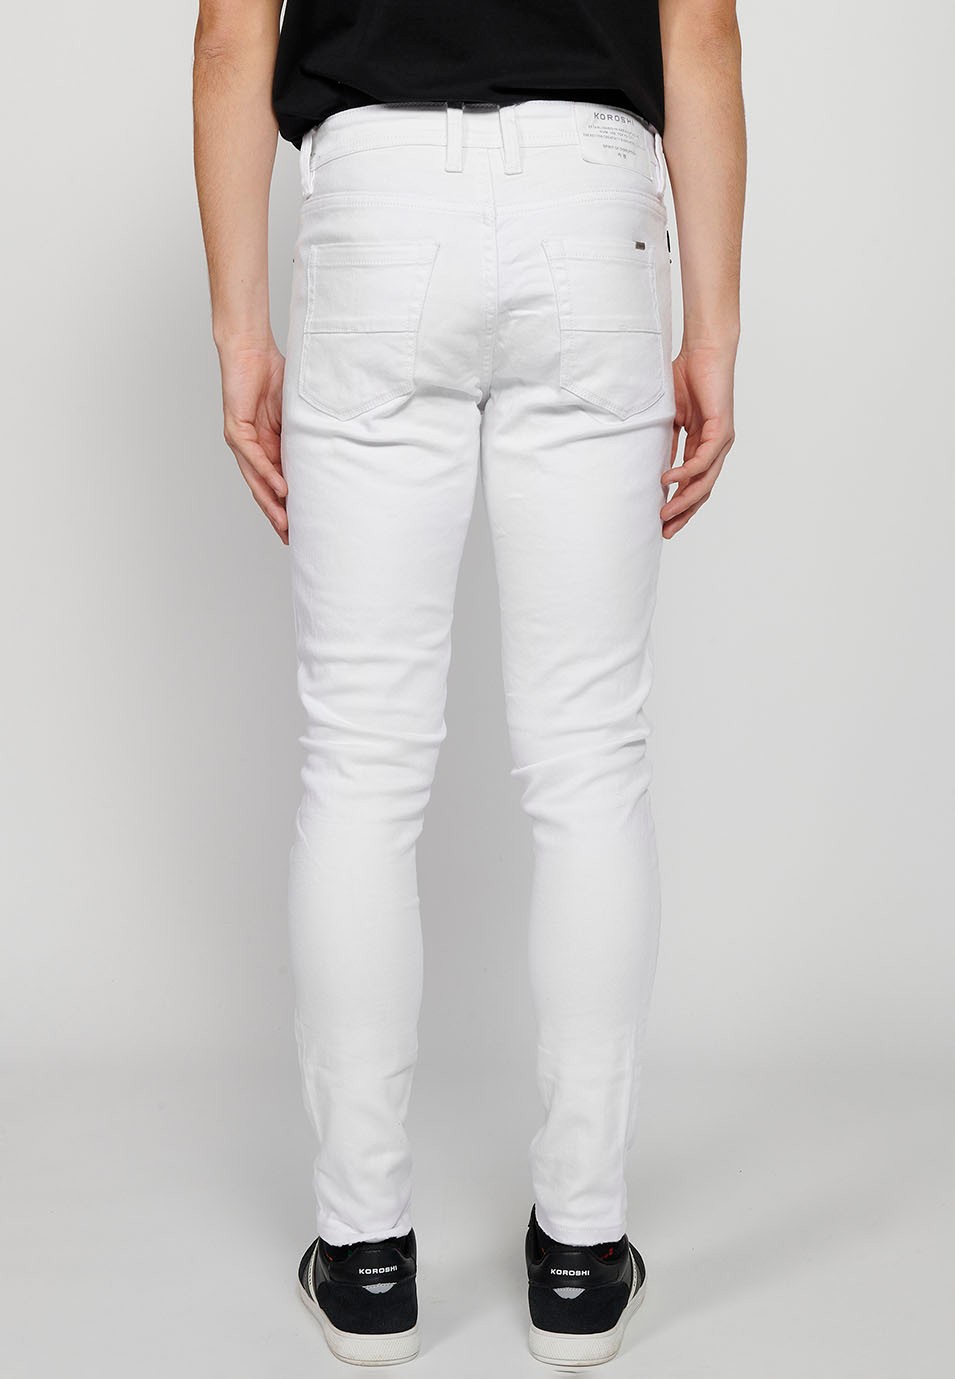 Super skinny jeans with front closure with zipper and button in White Denim for Men 5